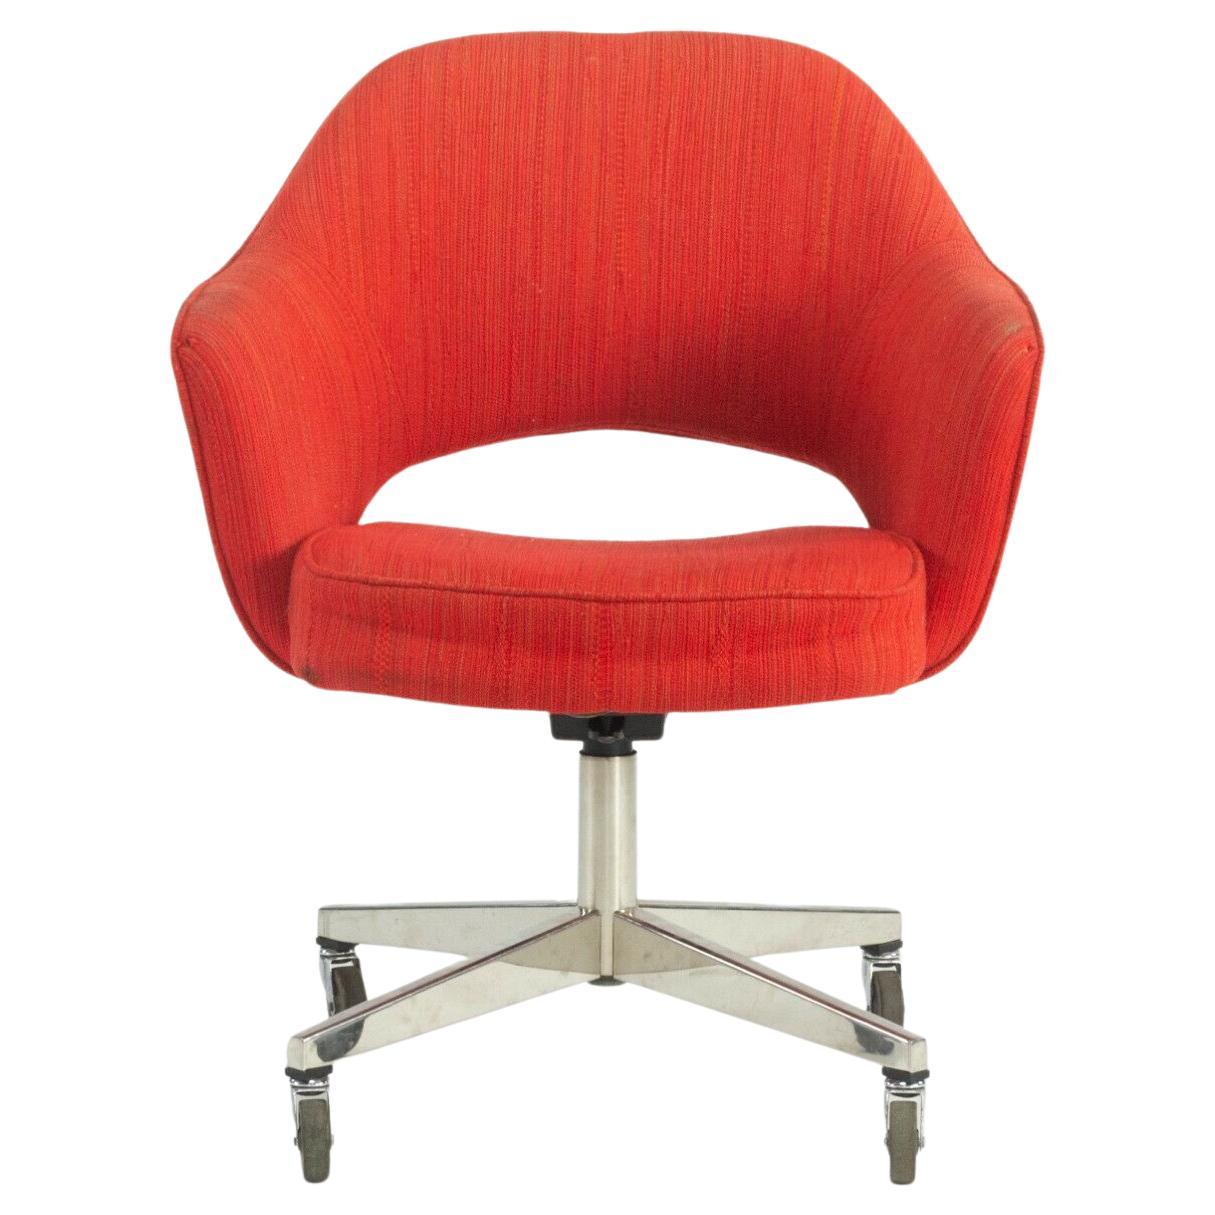 1974 Eero Saarinen for Knoll Rolling Executive Office Chairs Original Red Fabric For Sale